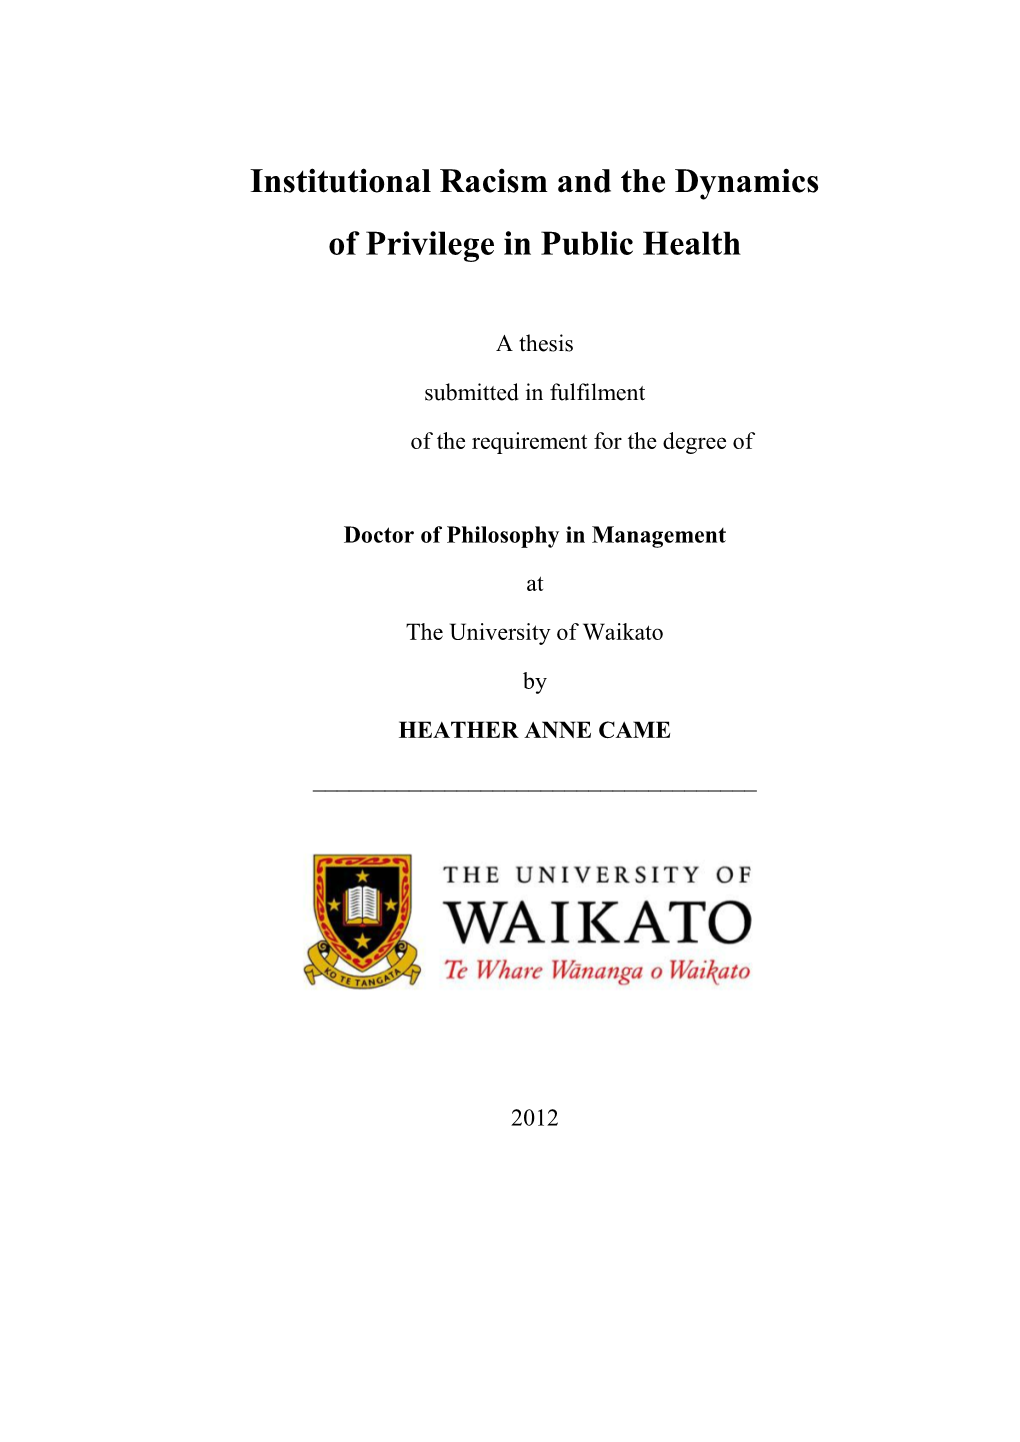 Institutional Racism and the Dynamics of Privilege in Public Health